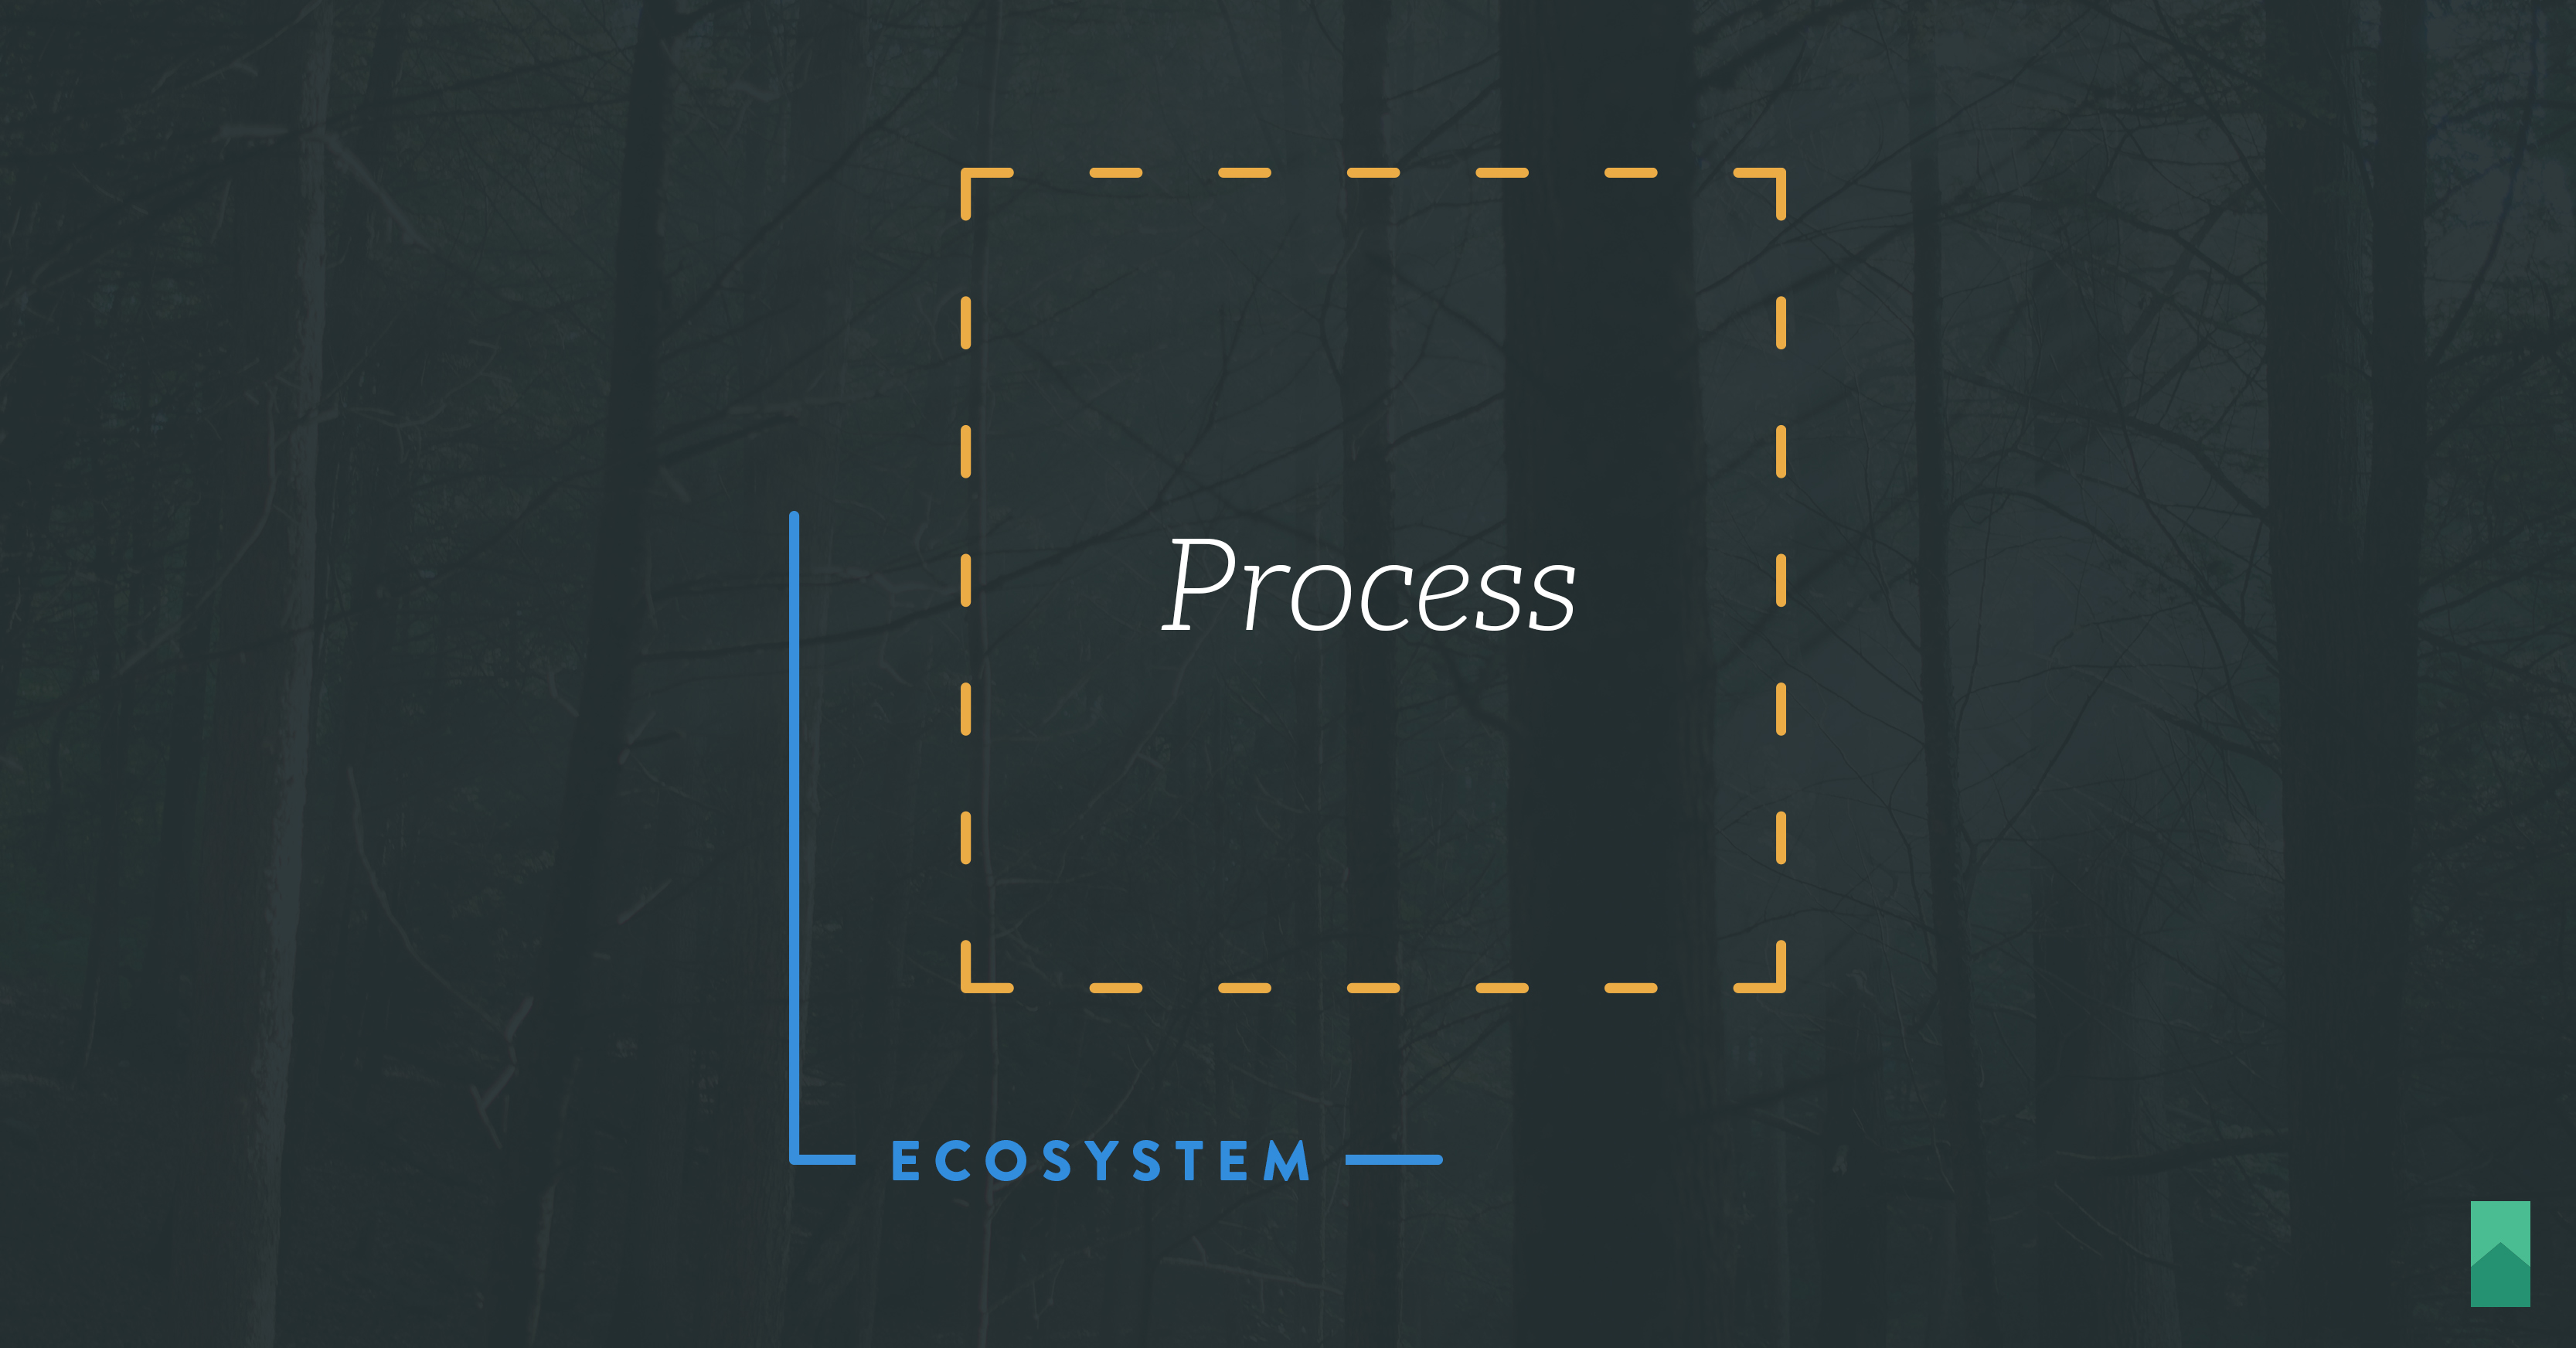 Congruence Between Agile Process and Ecosystem